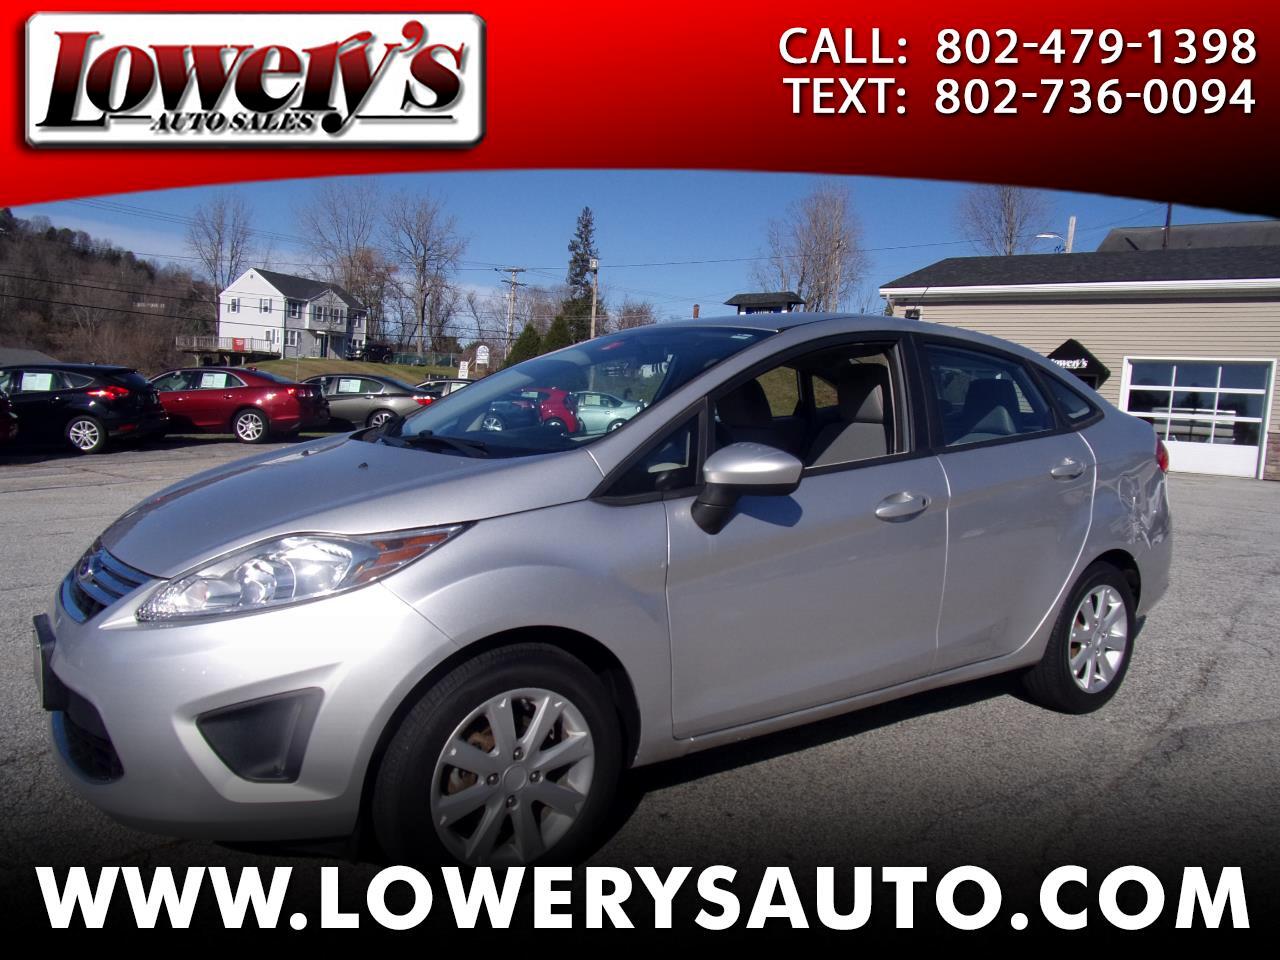 Used 2011 Ford Fiesta 4dr Sdn Se For Sale In Barre Vt 05641